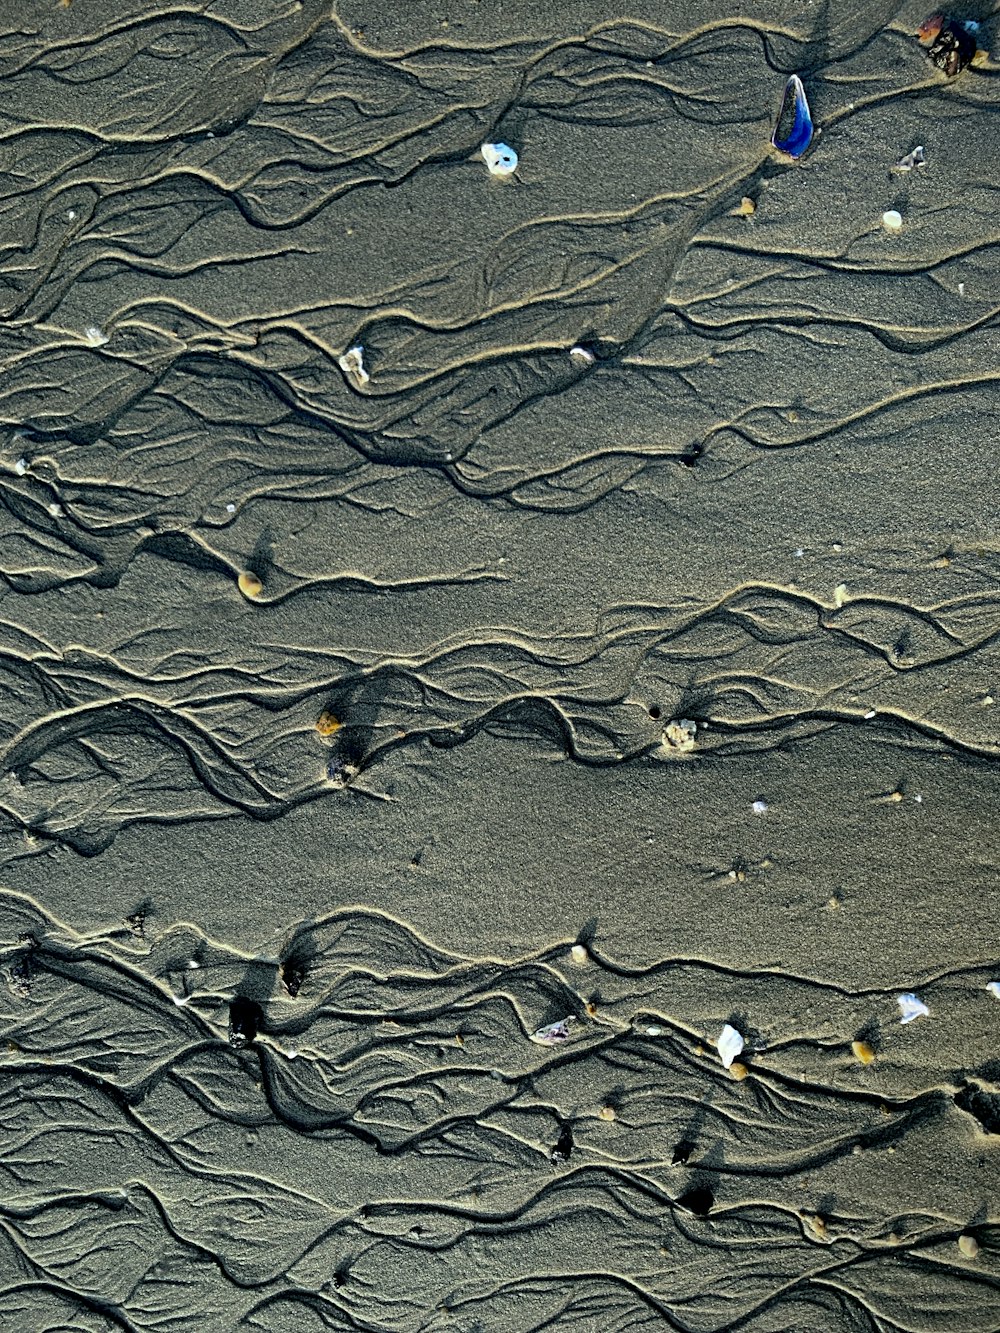 gray sand with footprints during daytime